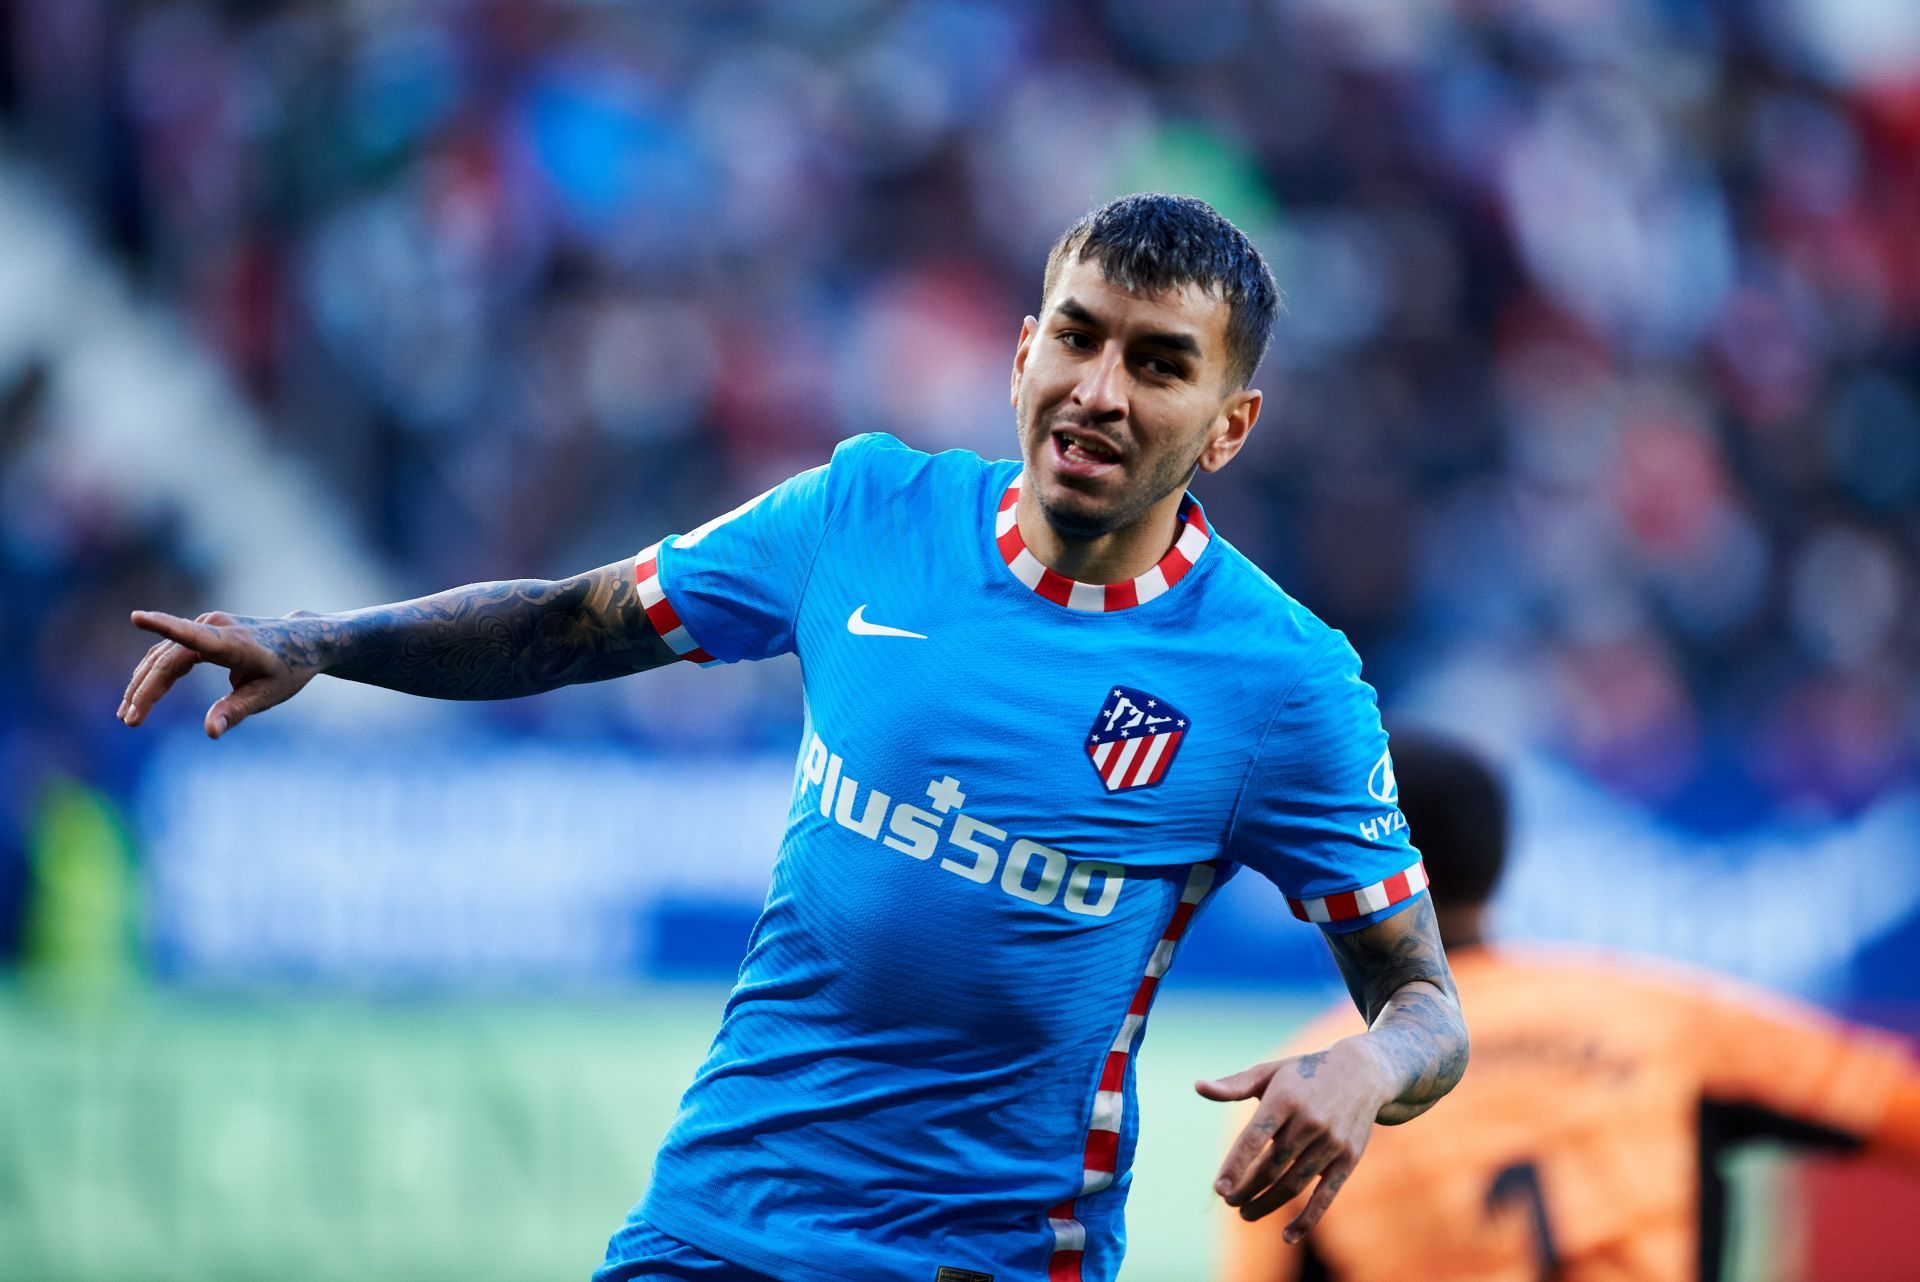 Angel Correa has been the unlikely top scorer for Atletico Madrid.